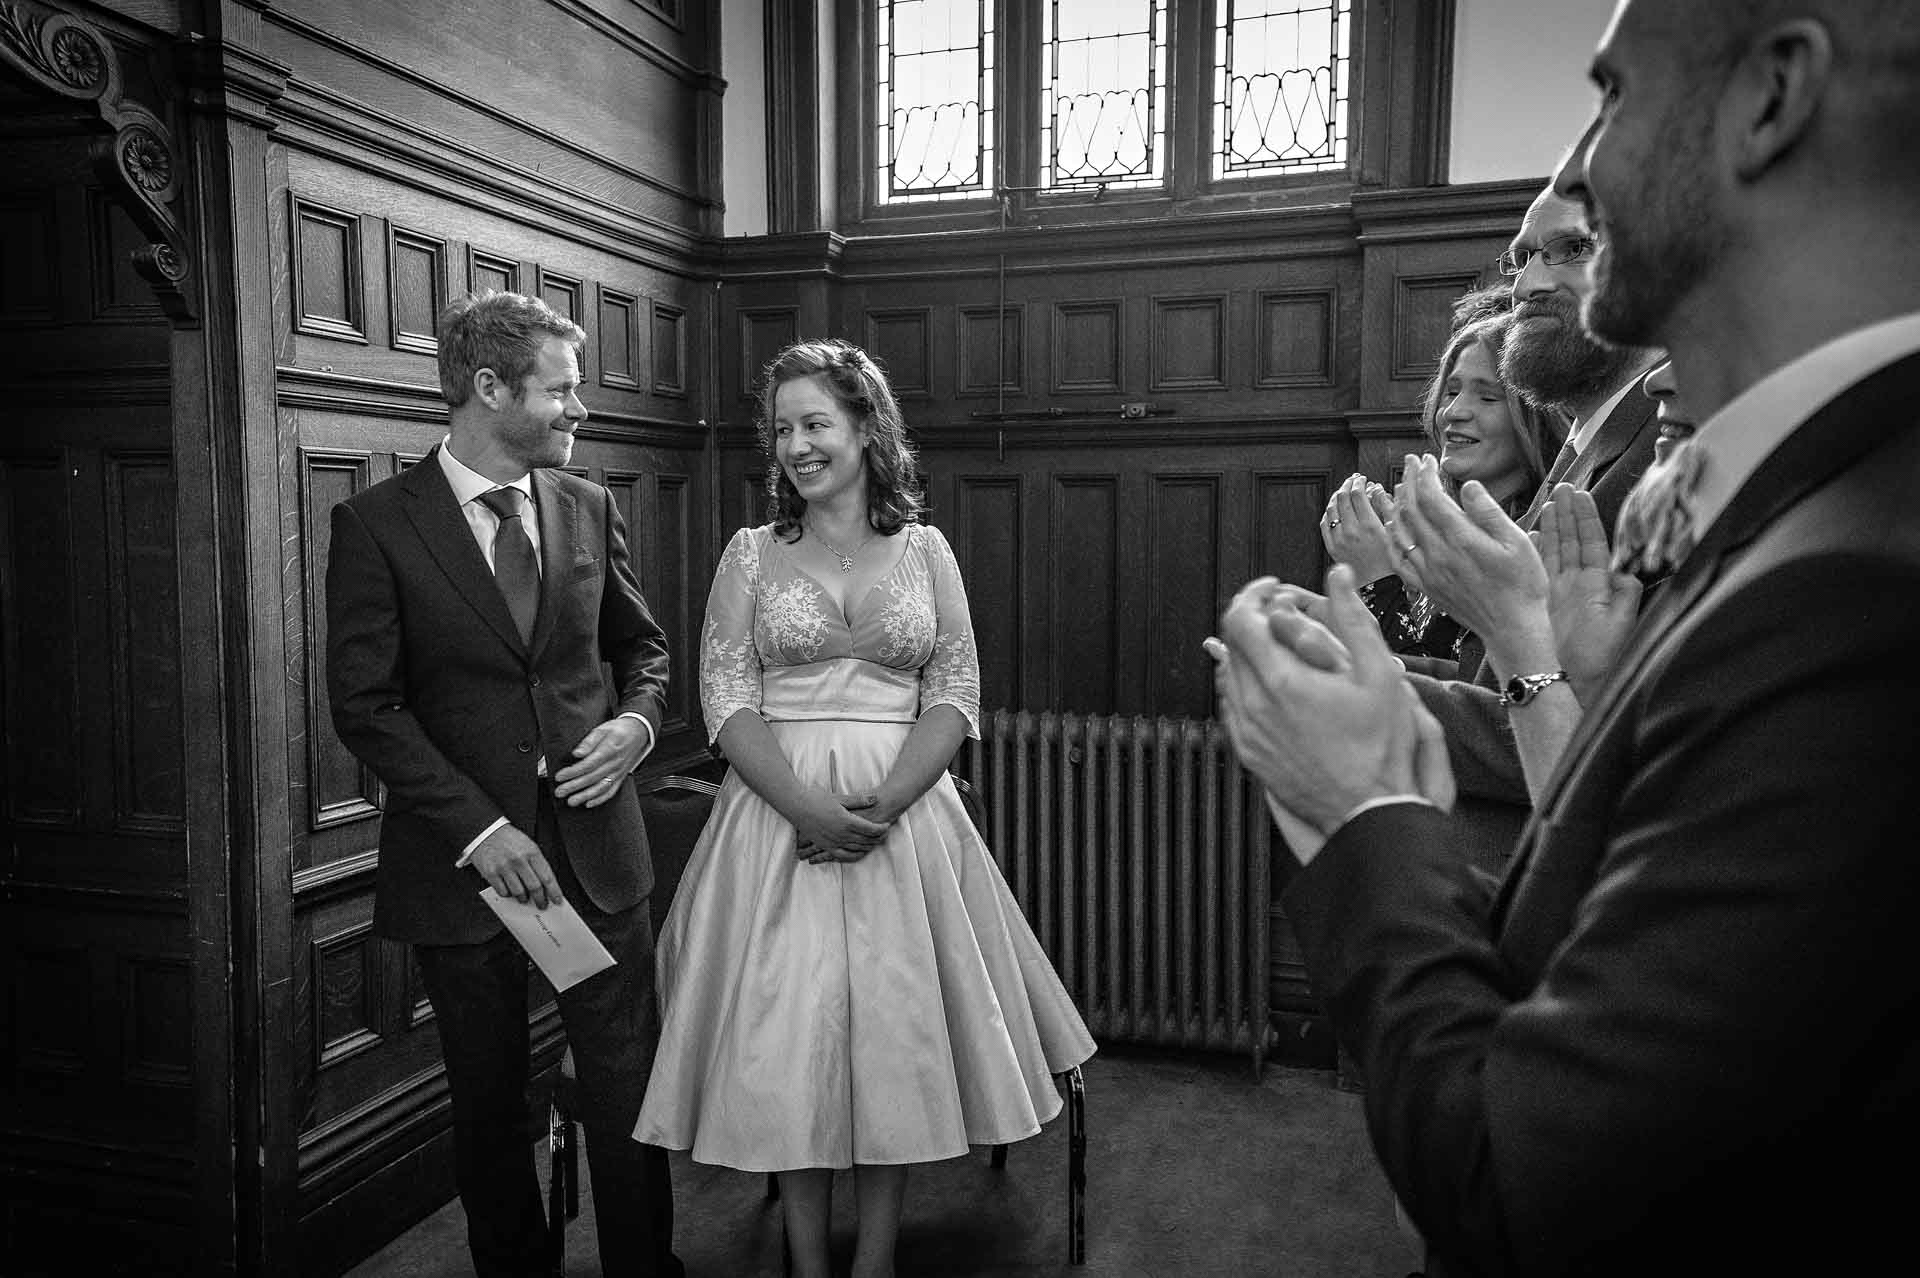 Guests Applaud the Newly Wedded Couple at Chiswick Town Hall Wedding